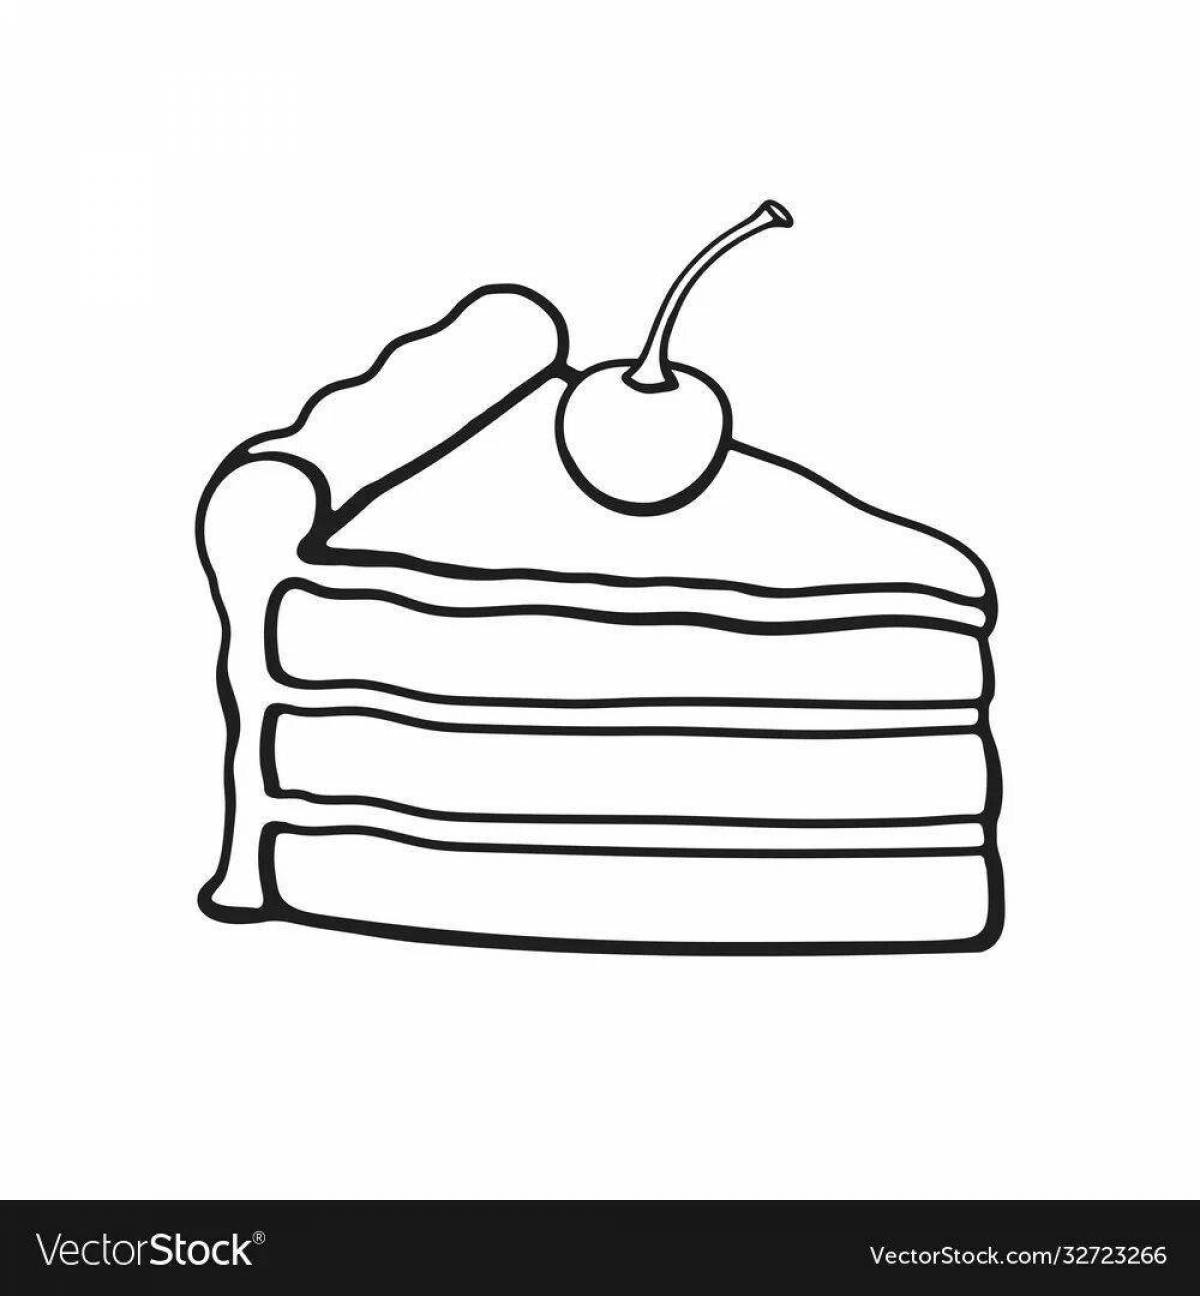 Chocolate cake coloring page with colorful layers